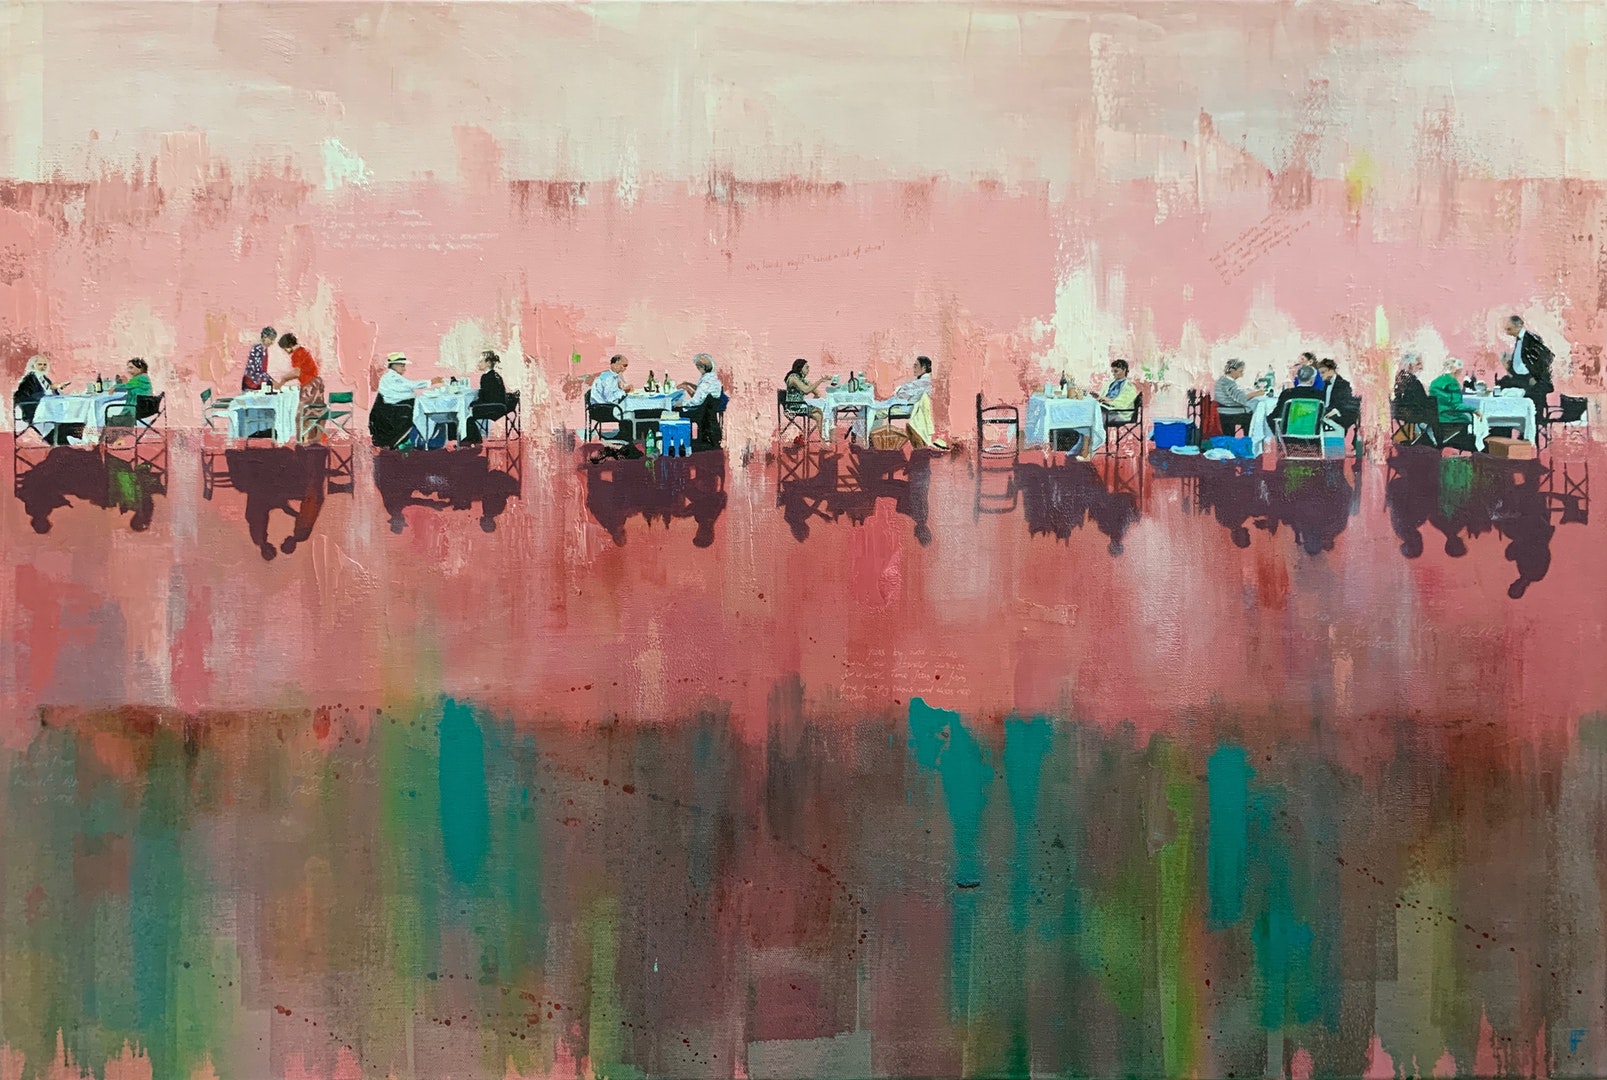 'All the world's a stage', Frances Featherstone, Oil on canvas, 60 x 100 cm